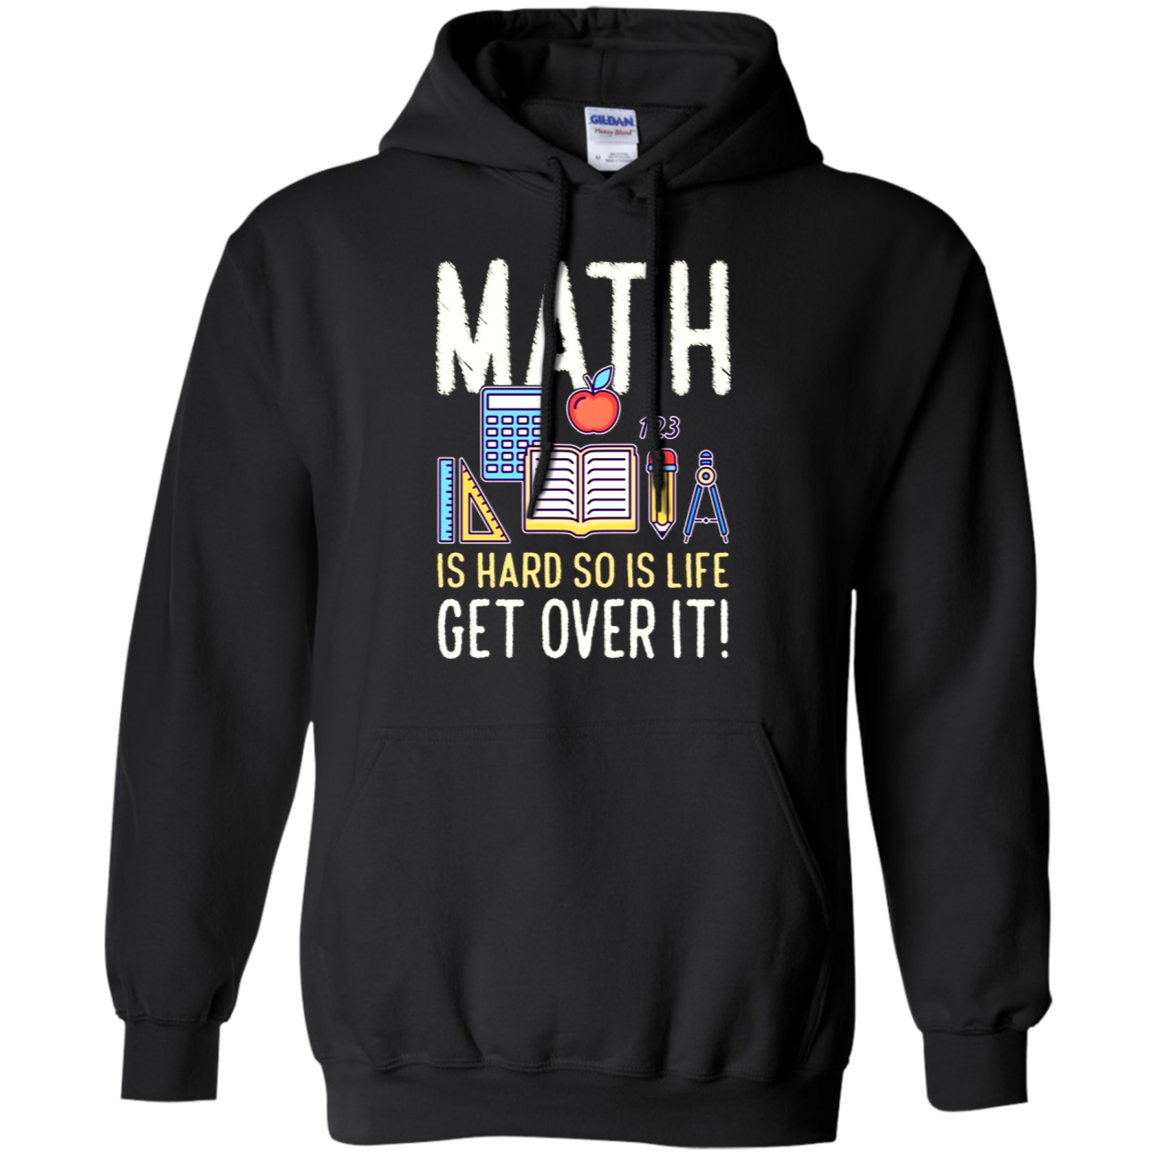 Math Is Hard So Is Life Get Over It Shirt G185 Pullover 8 Oz.